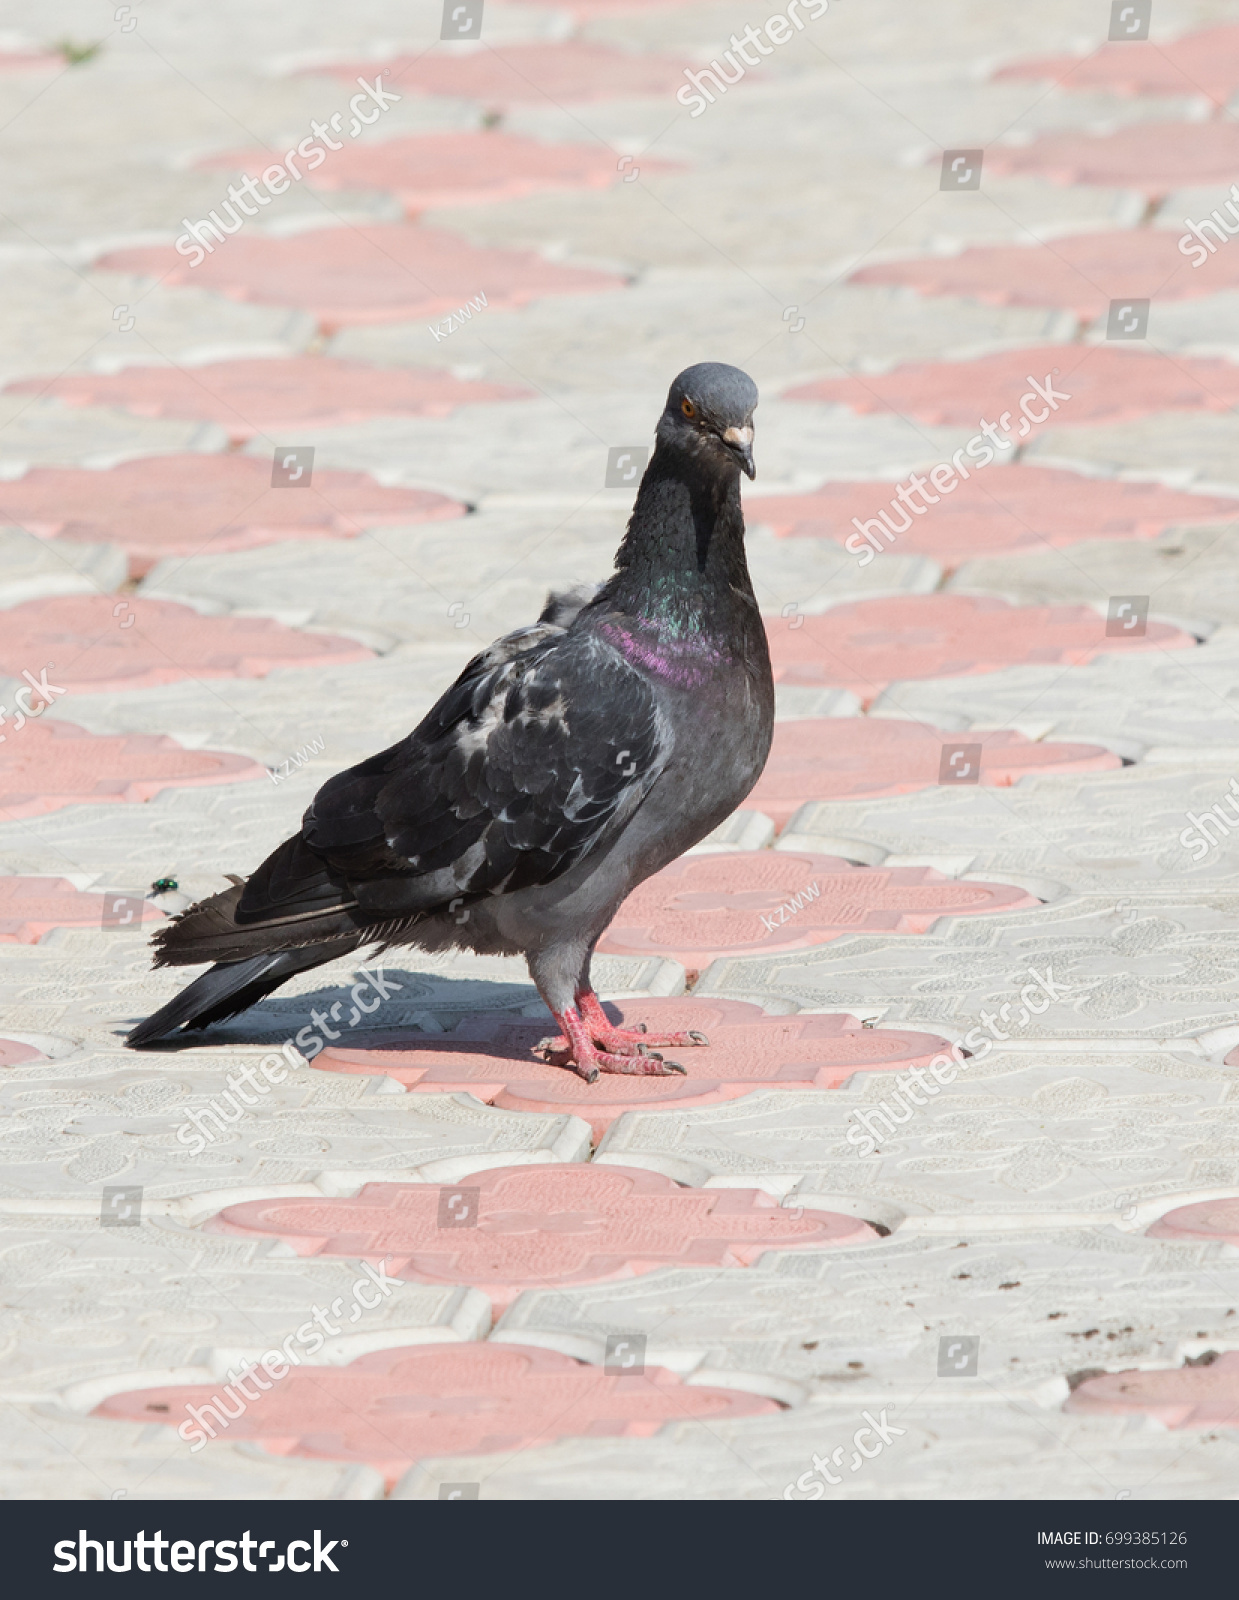 Pigeon in the pavement #699385126